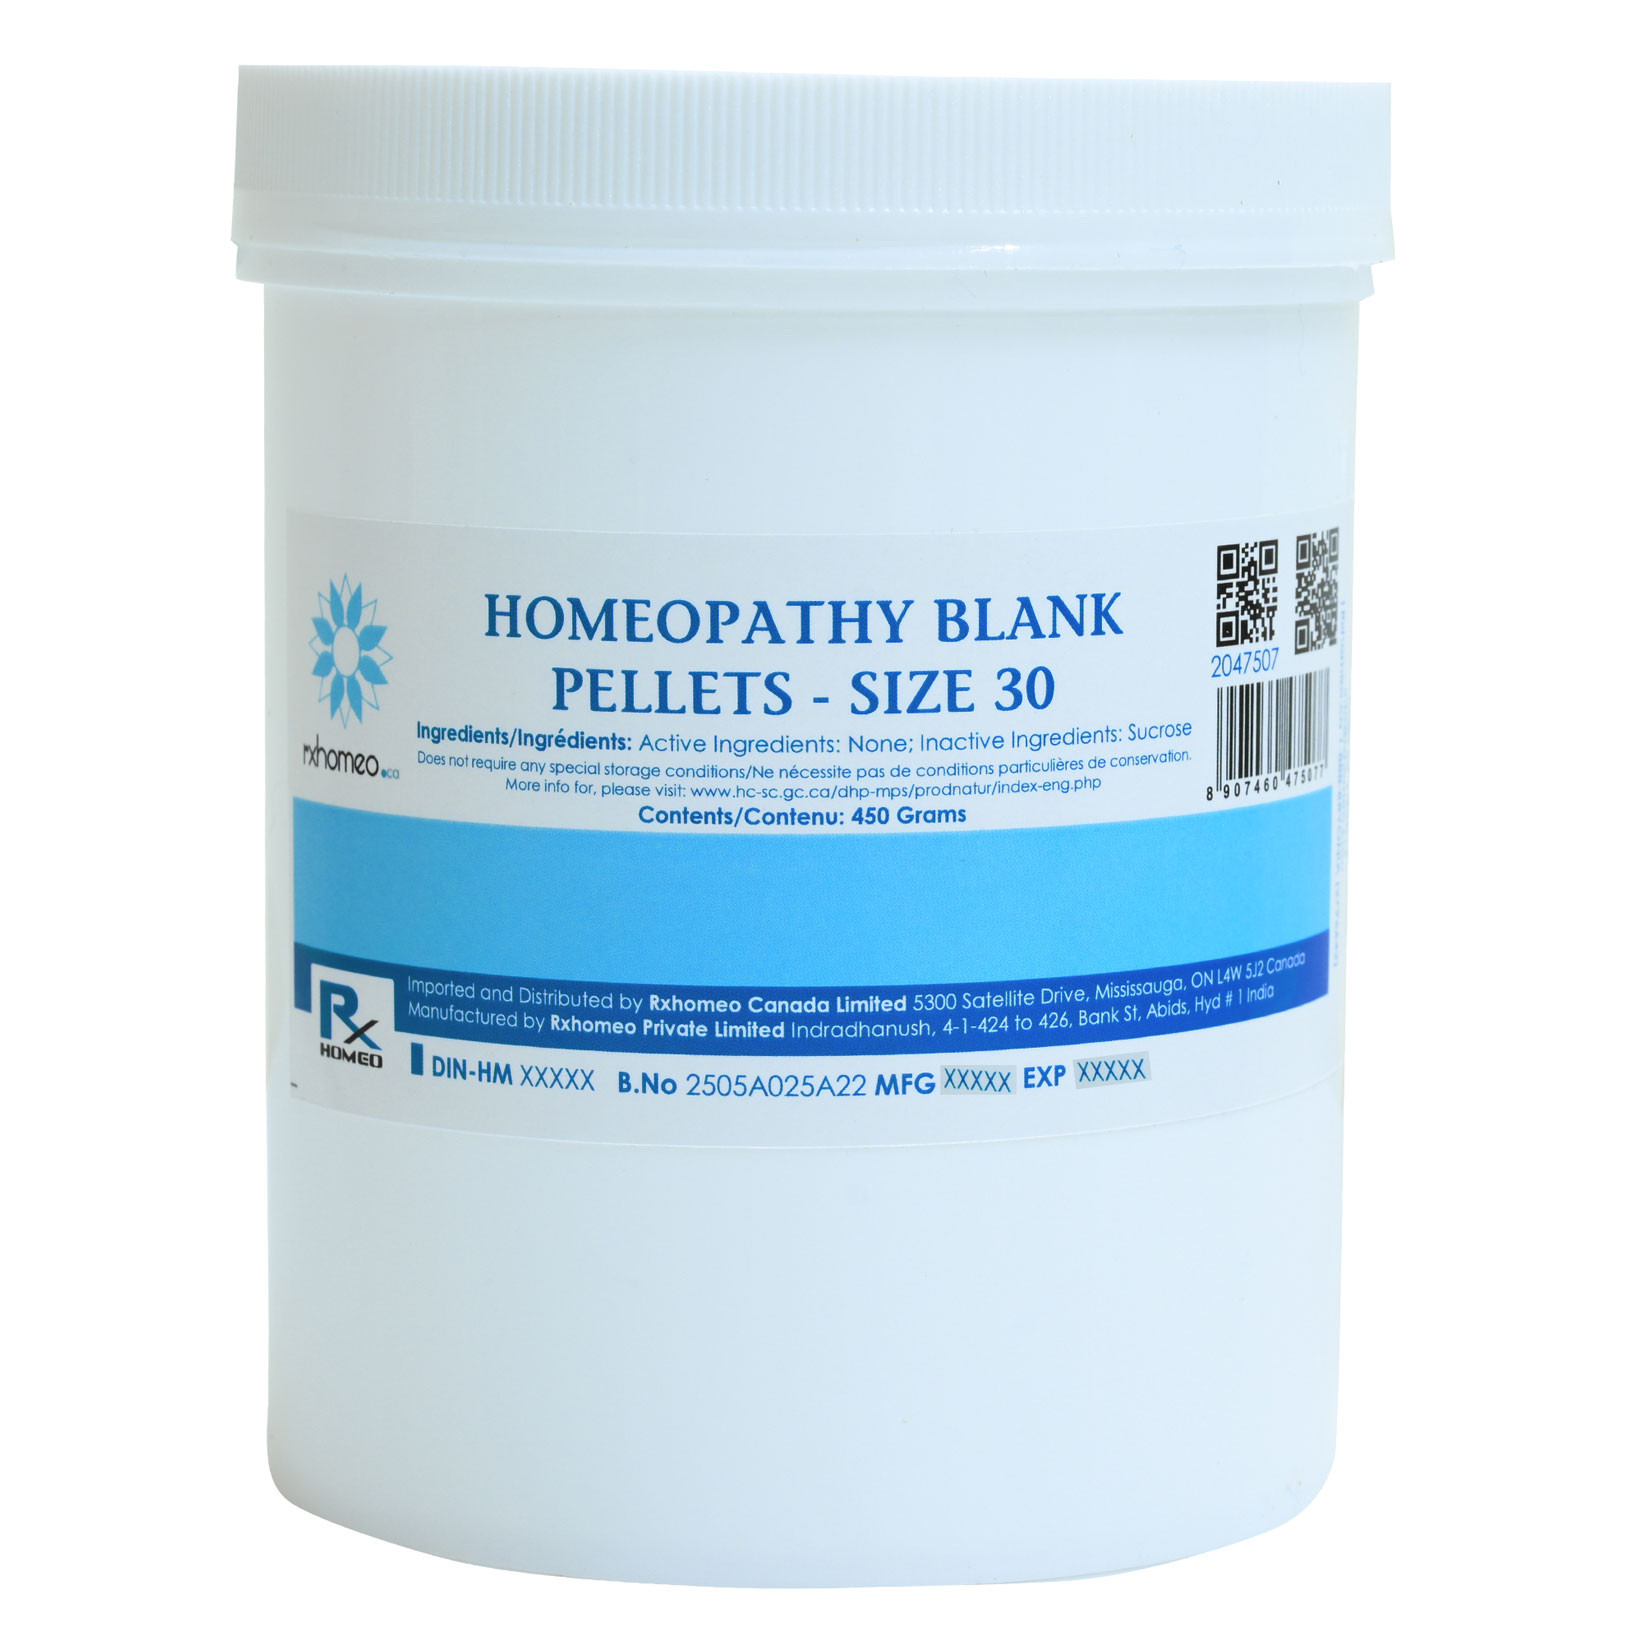 HOMEOPATHY BLANK PELLETS Size 30 - English and French Label for Canada